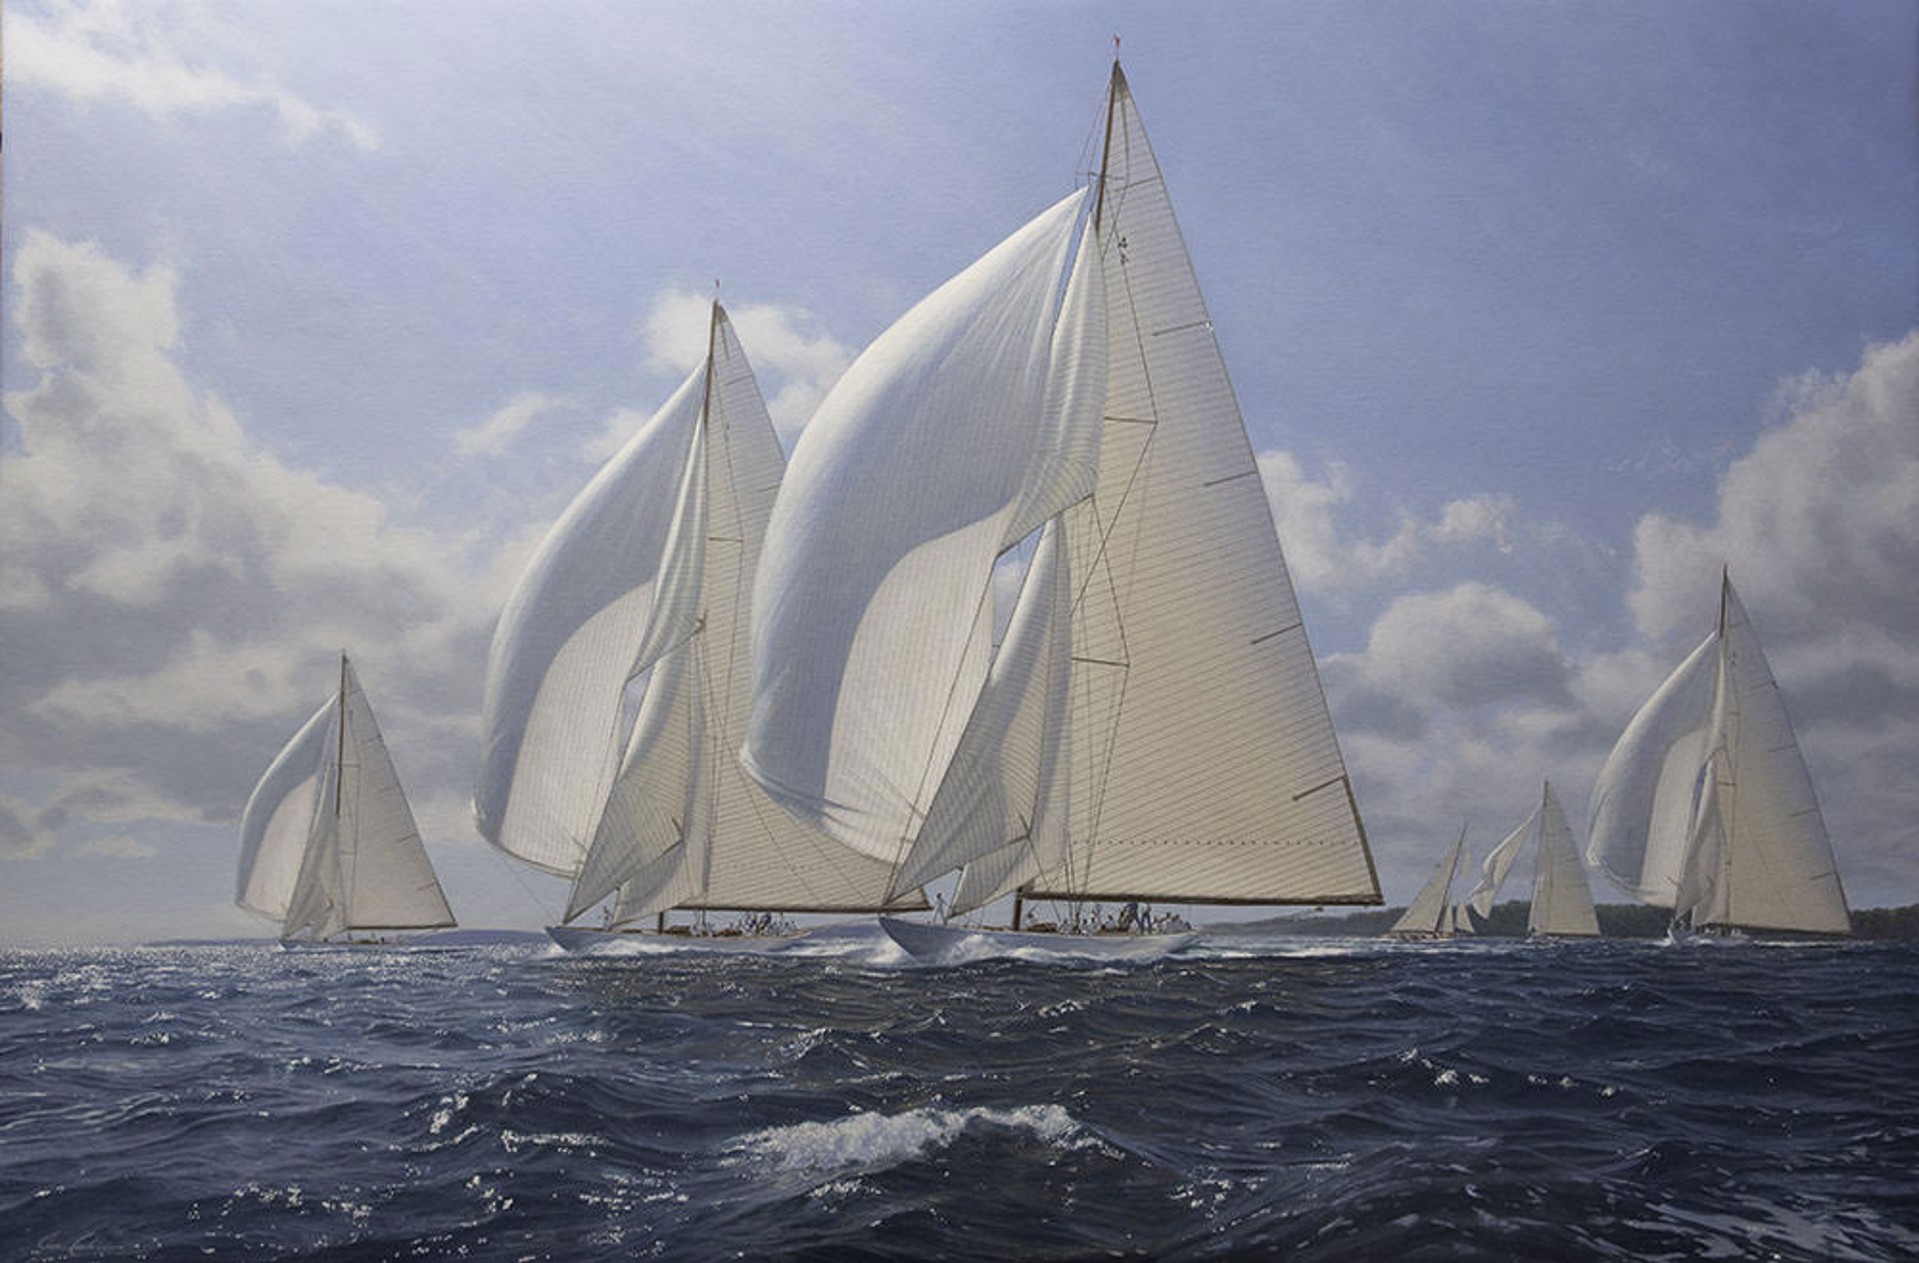 Spinnakers to Starboard June 17th 1930 by Shane Michael Couch